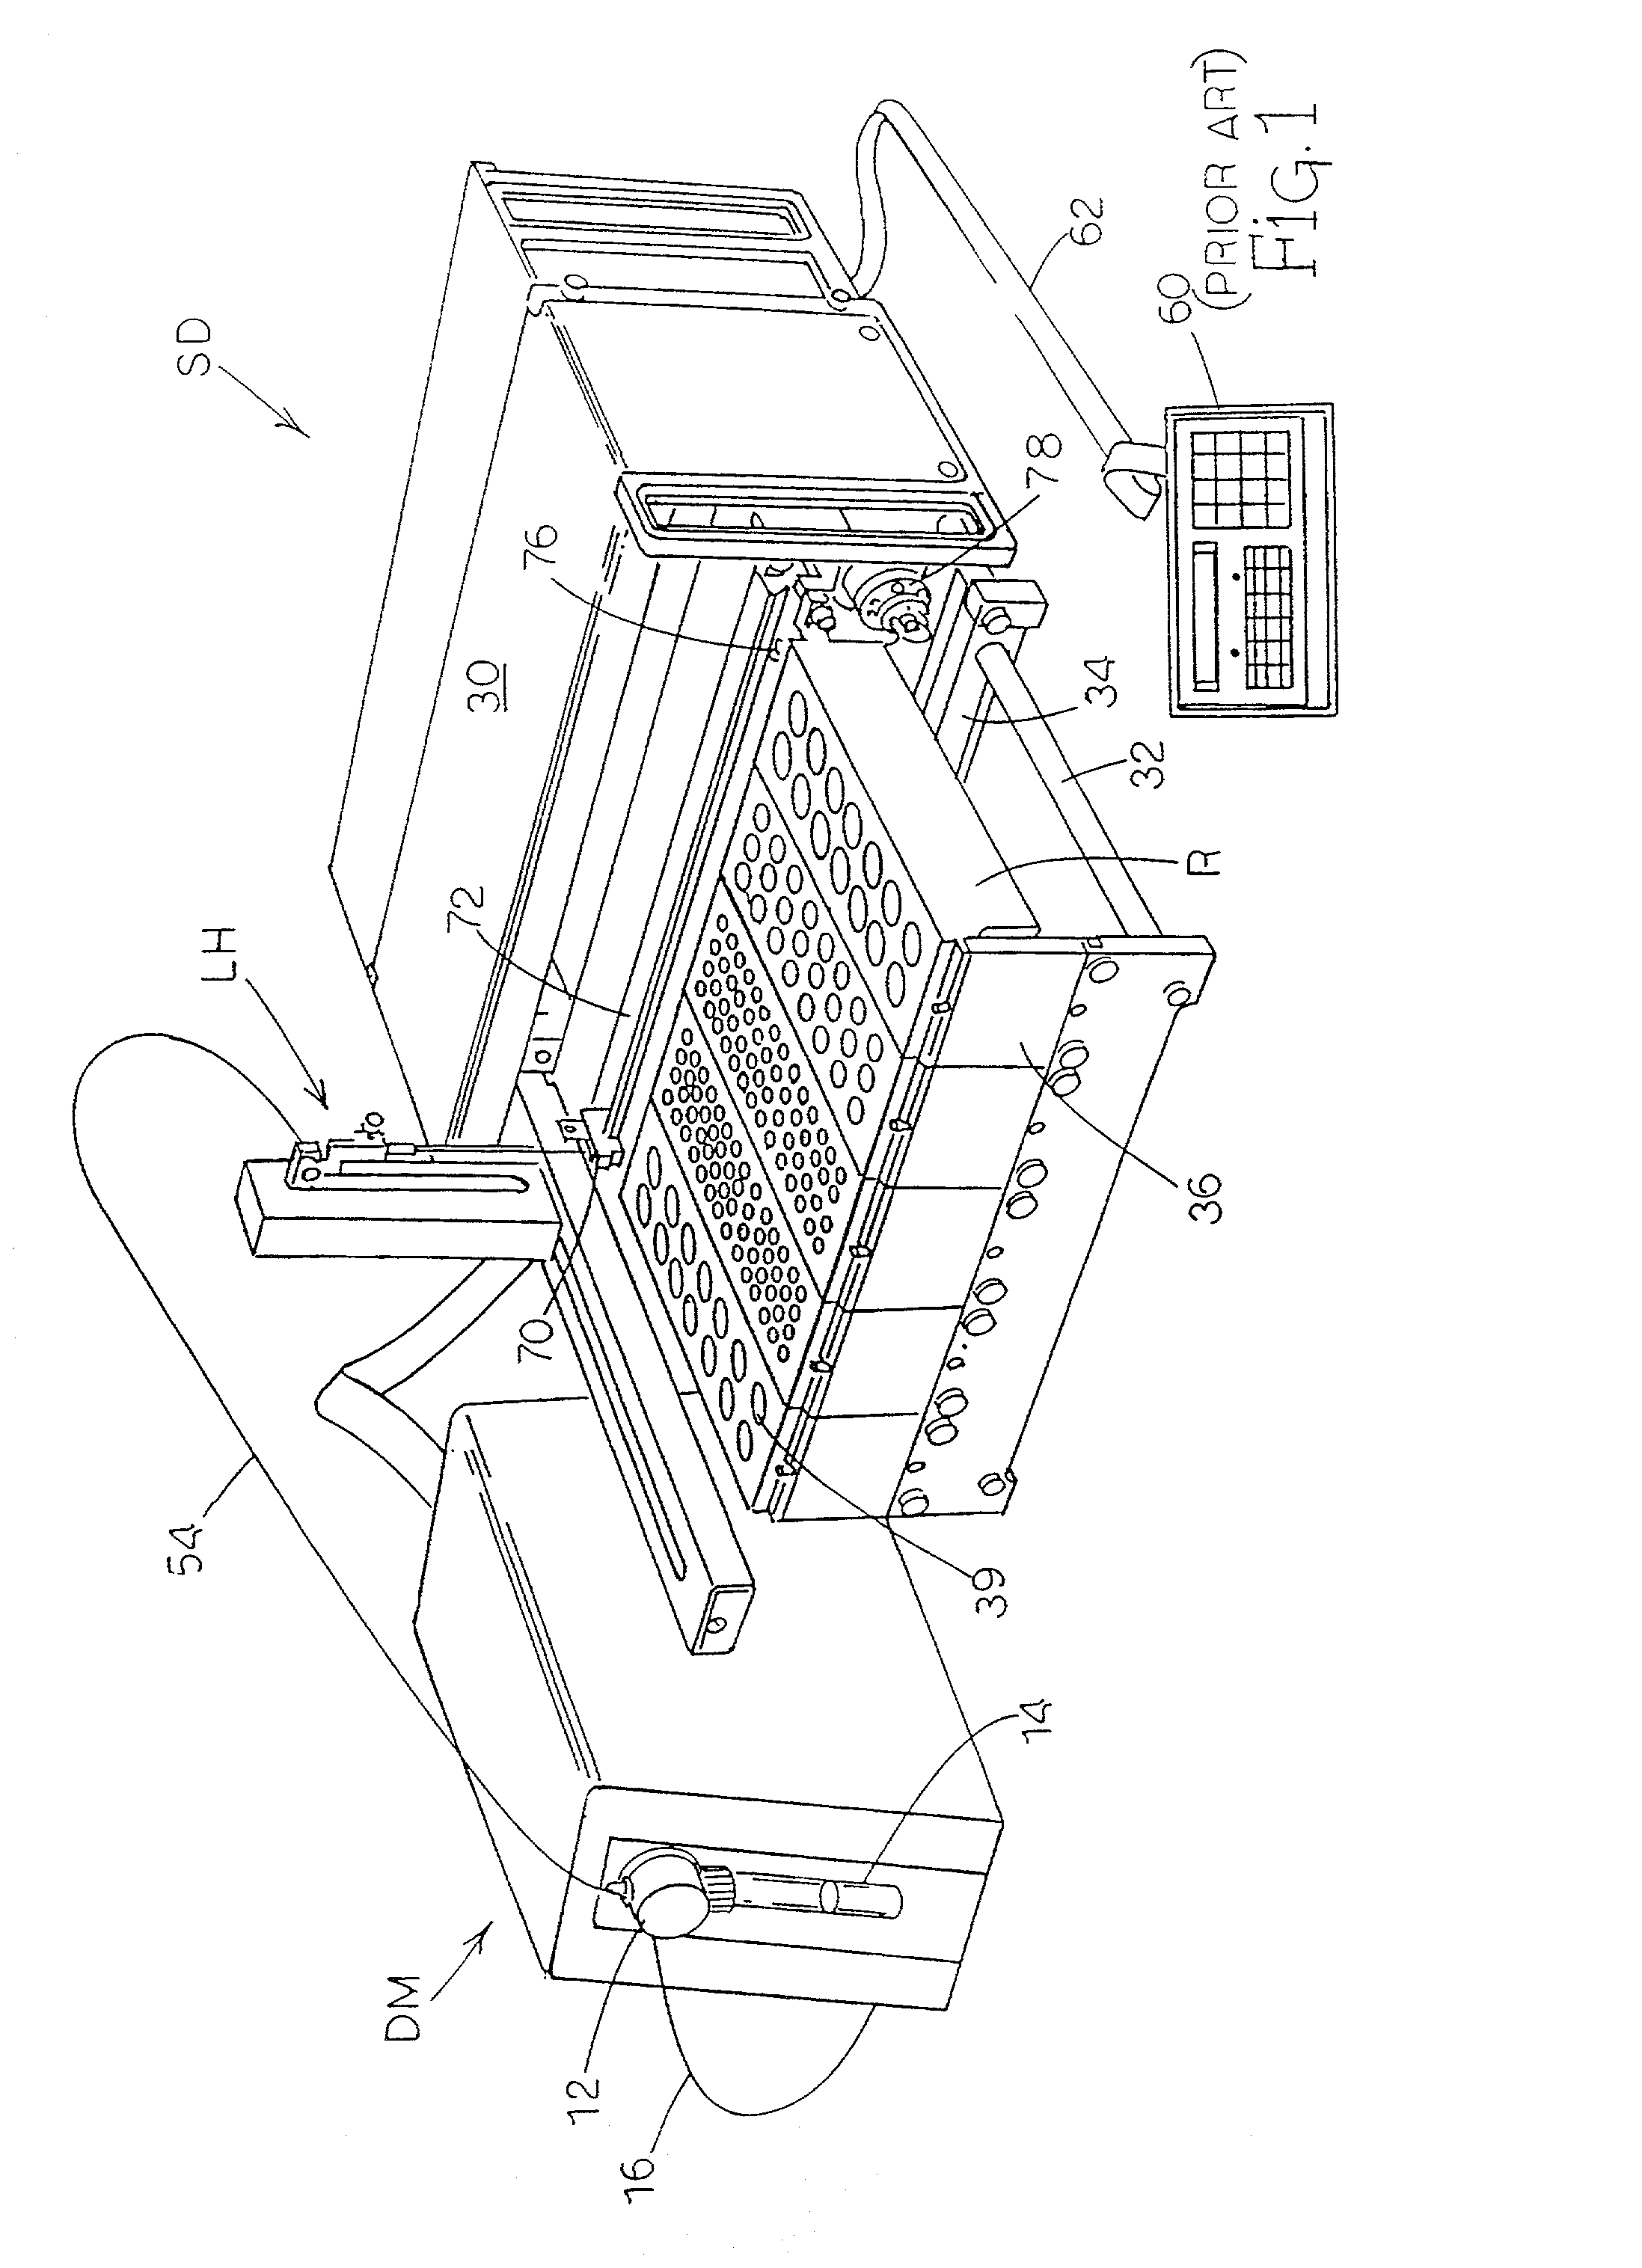 High throughput crystal form screening workstation and method of use